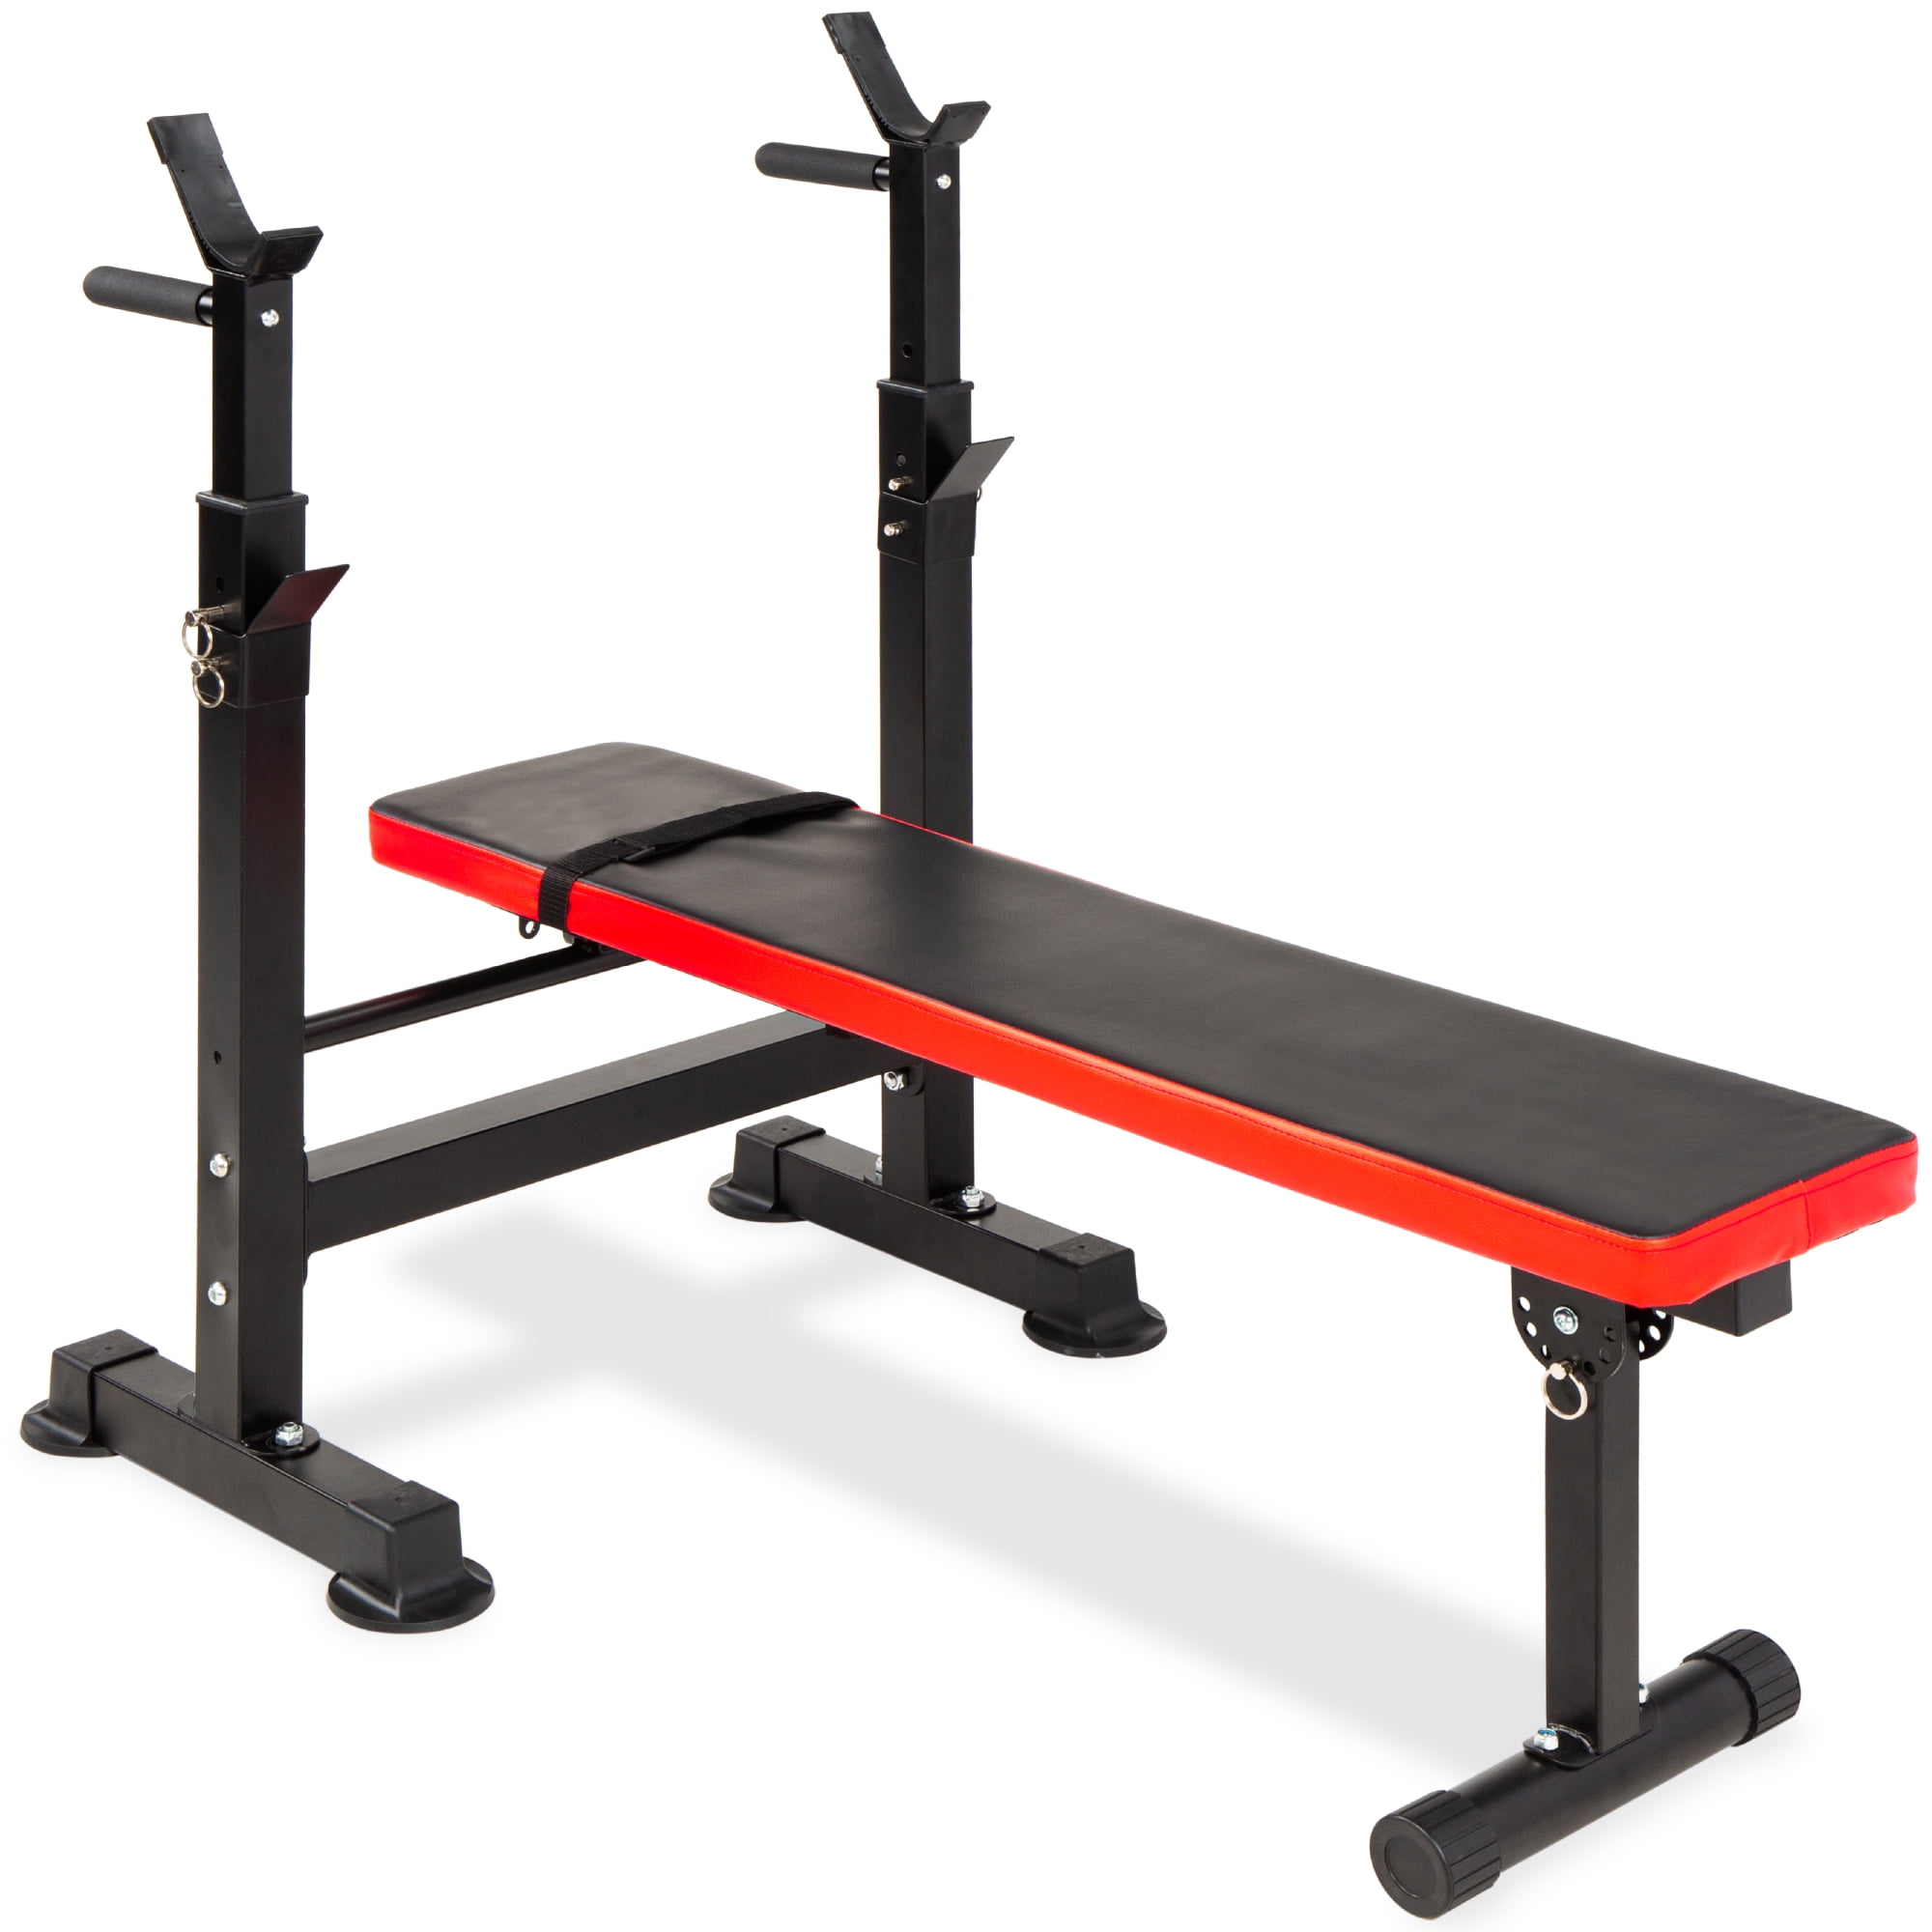 Details about   Adjustable Weight Bench Press Barbell Rack Exercise Lifting Strengh Training USA 